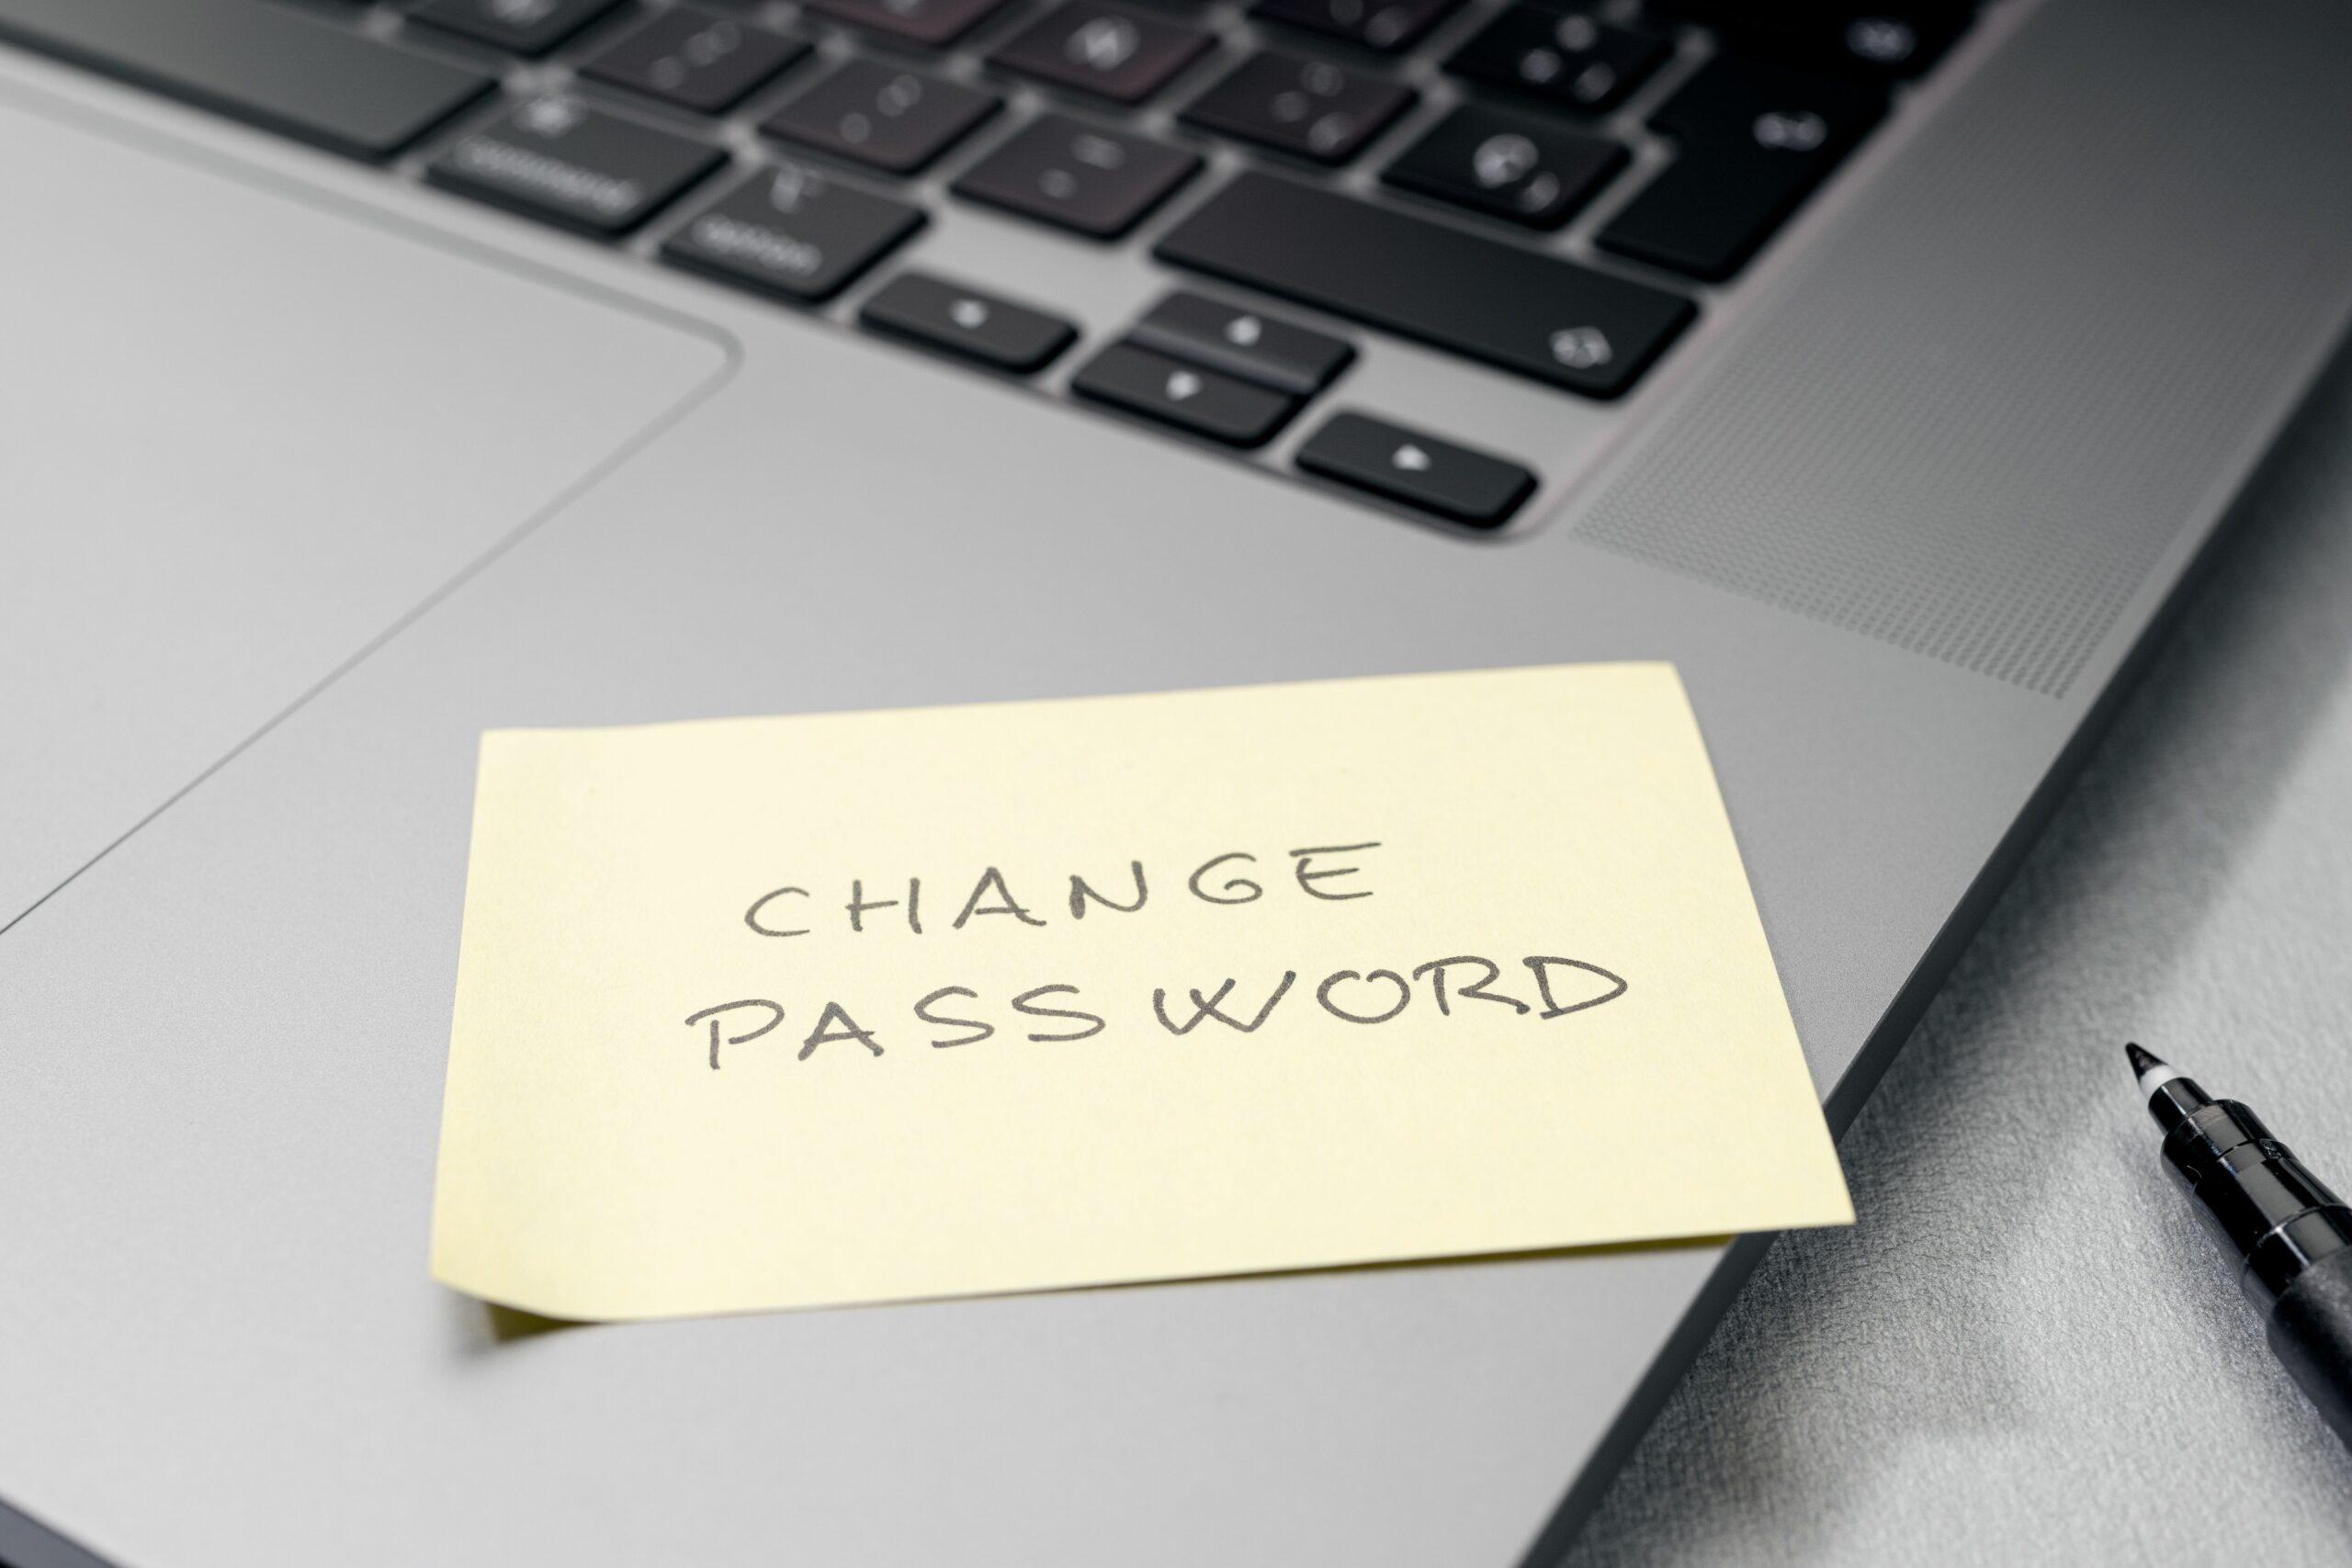 Change password message on sticky note on laptop